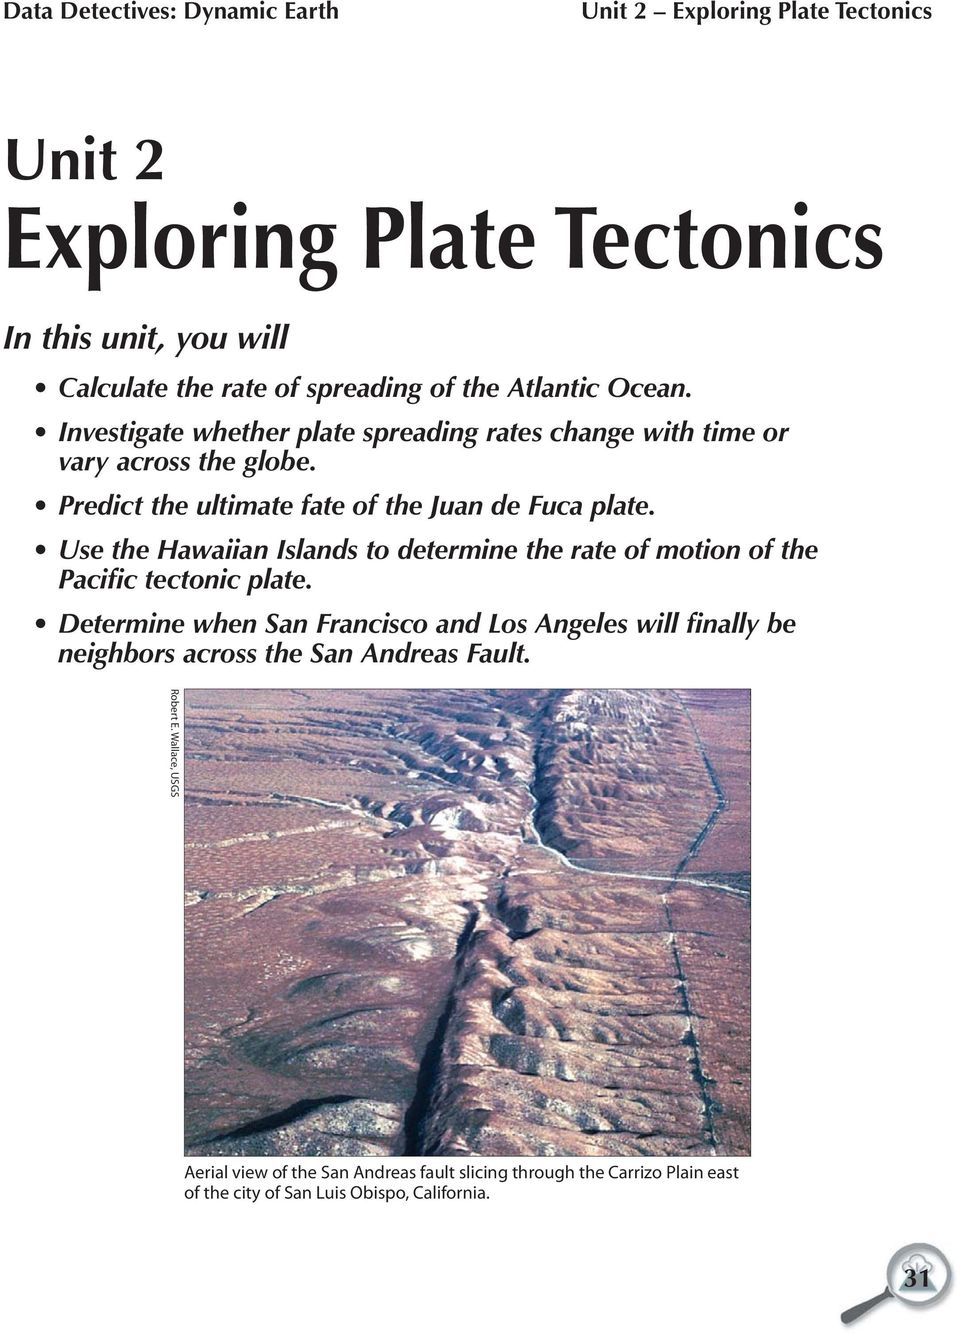 Use the Hawaiian Islands to determine the rate of motion of the Pacific tectonic plate.